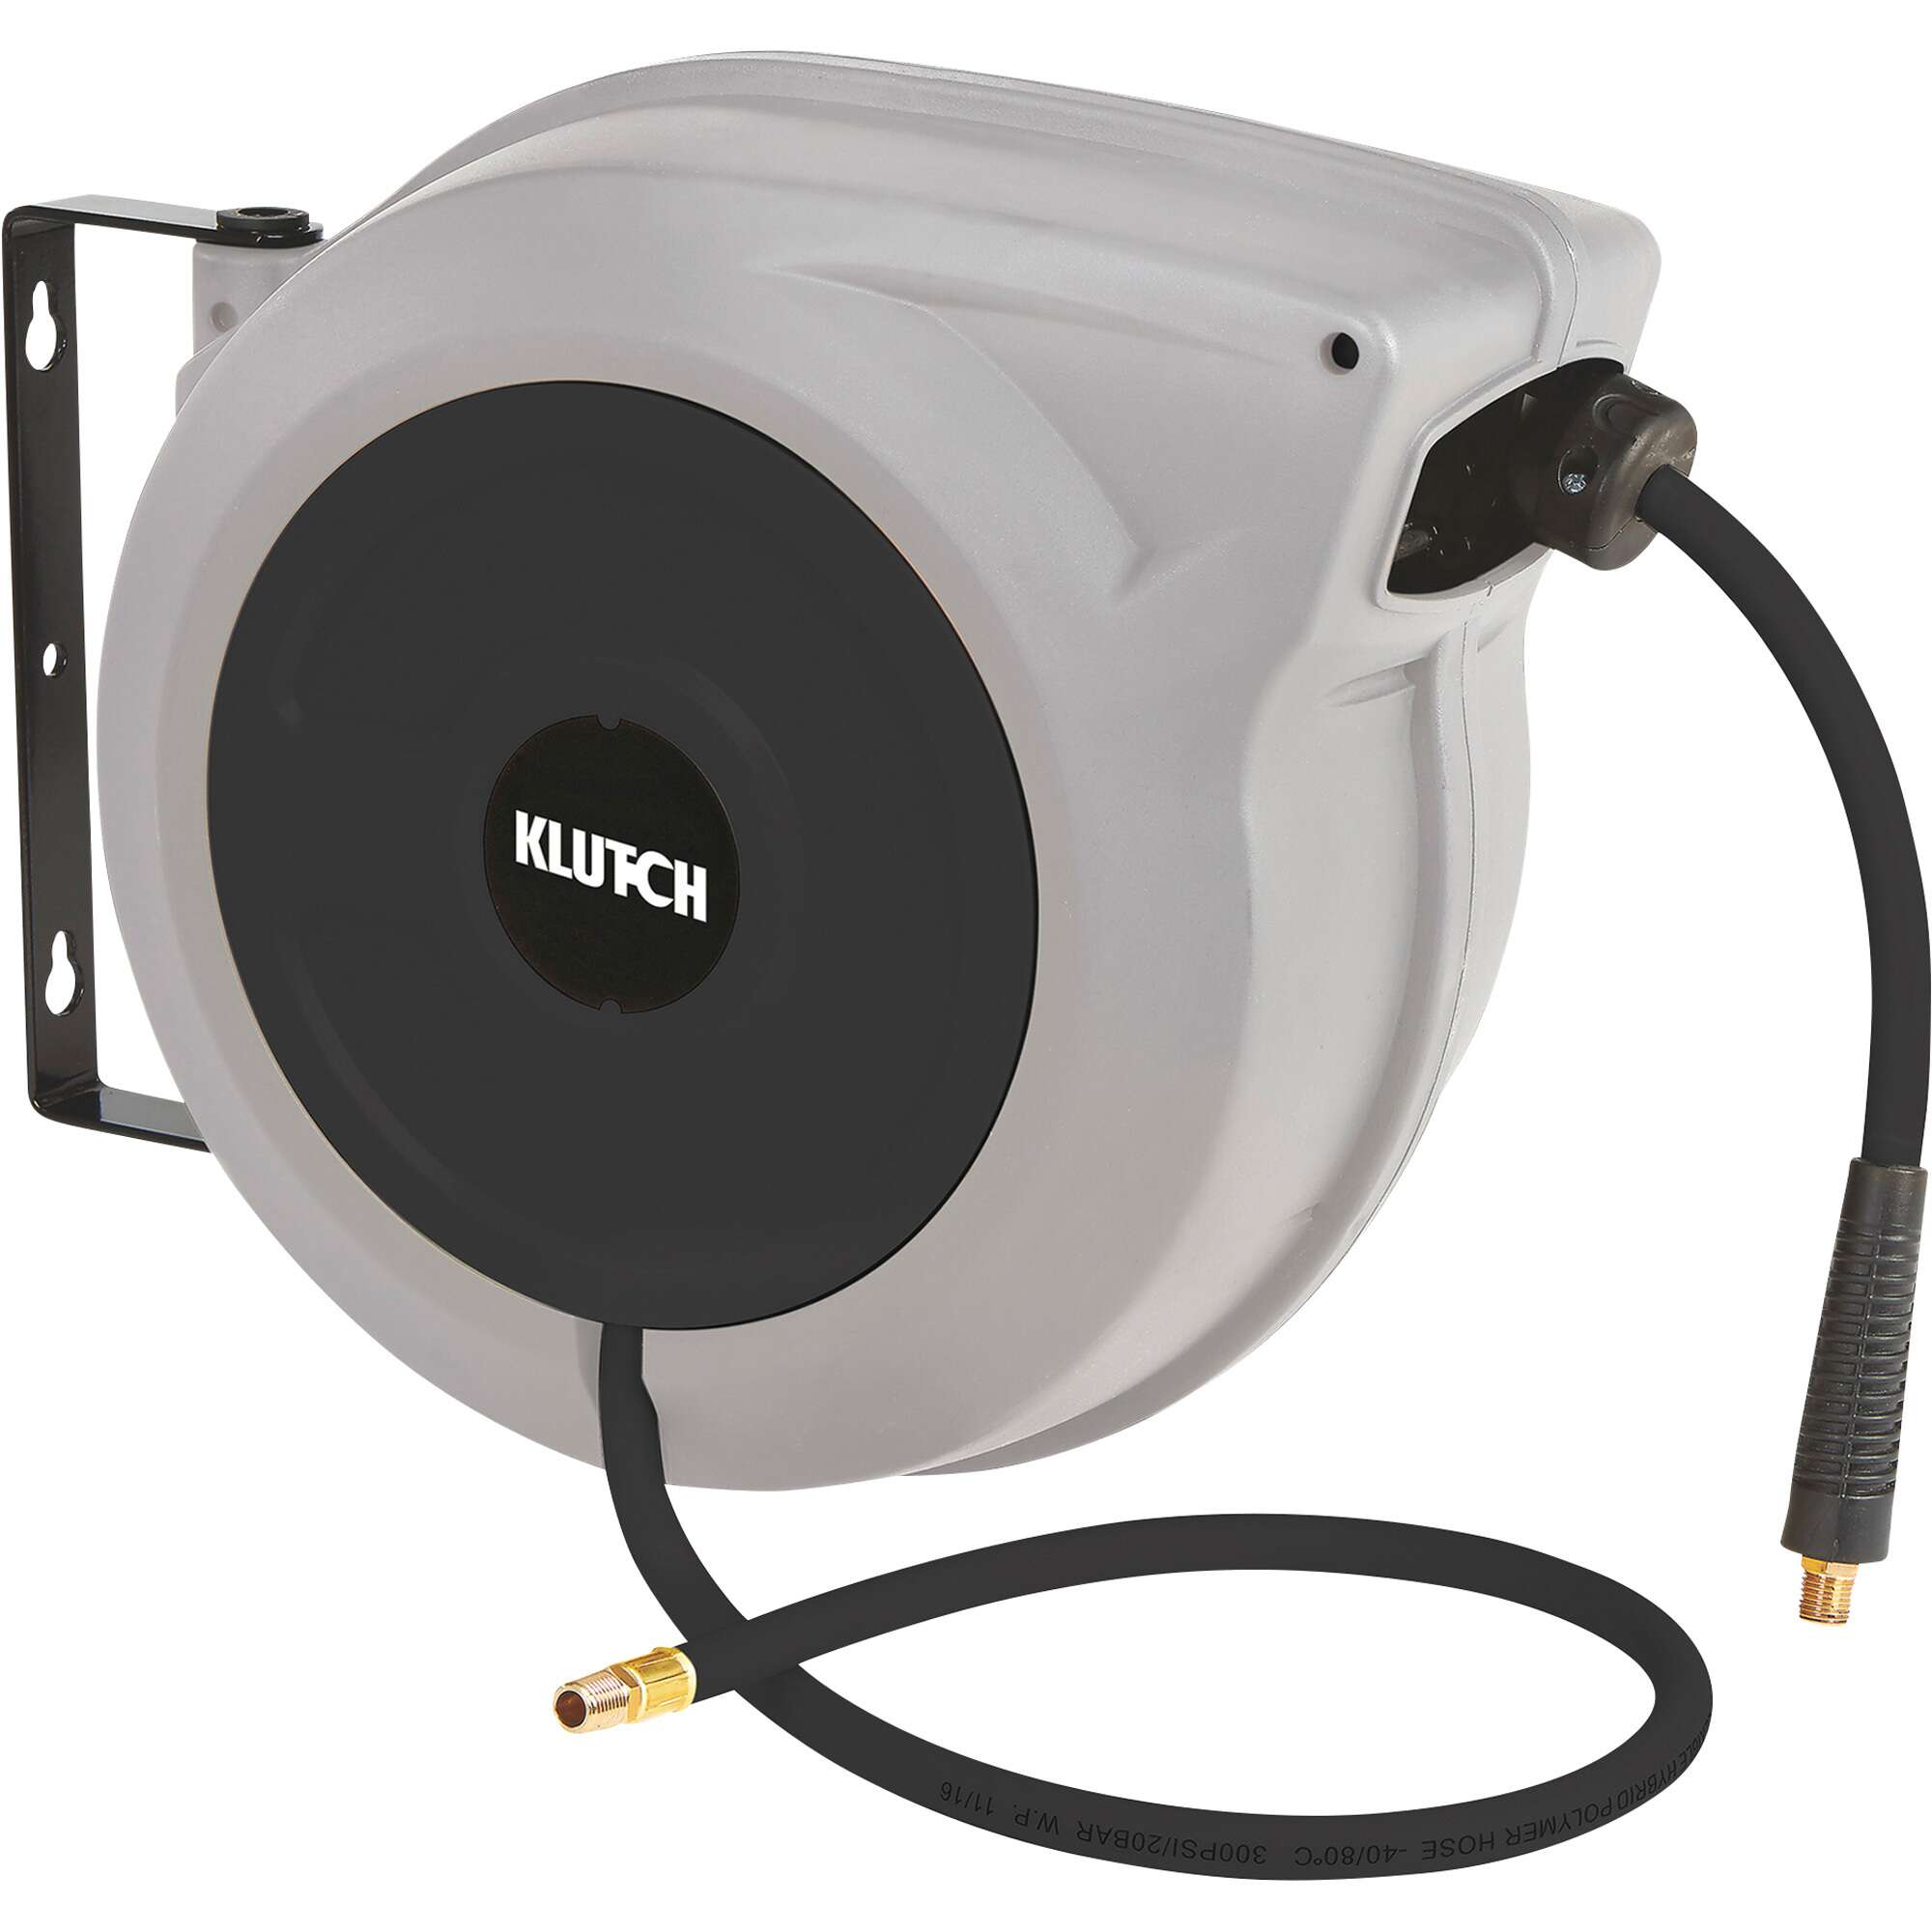 Klutch Auto Rewind Air Hose Reel - with 3/8in. x 50ft. Hybrid Polymer Hose,  300 Max. PSI 